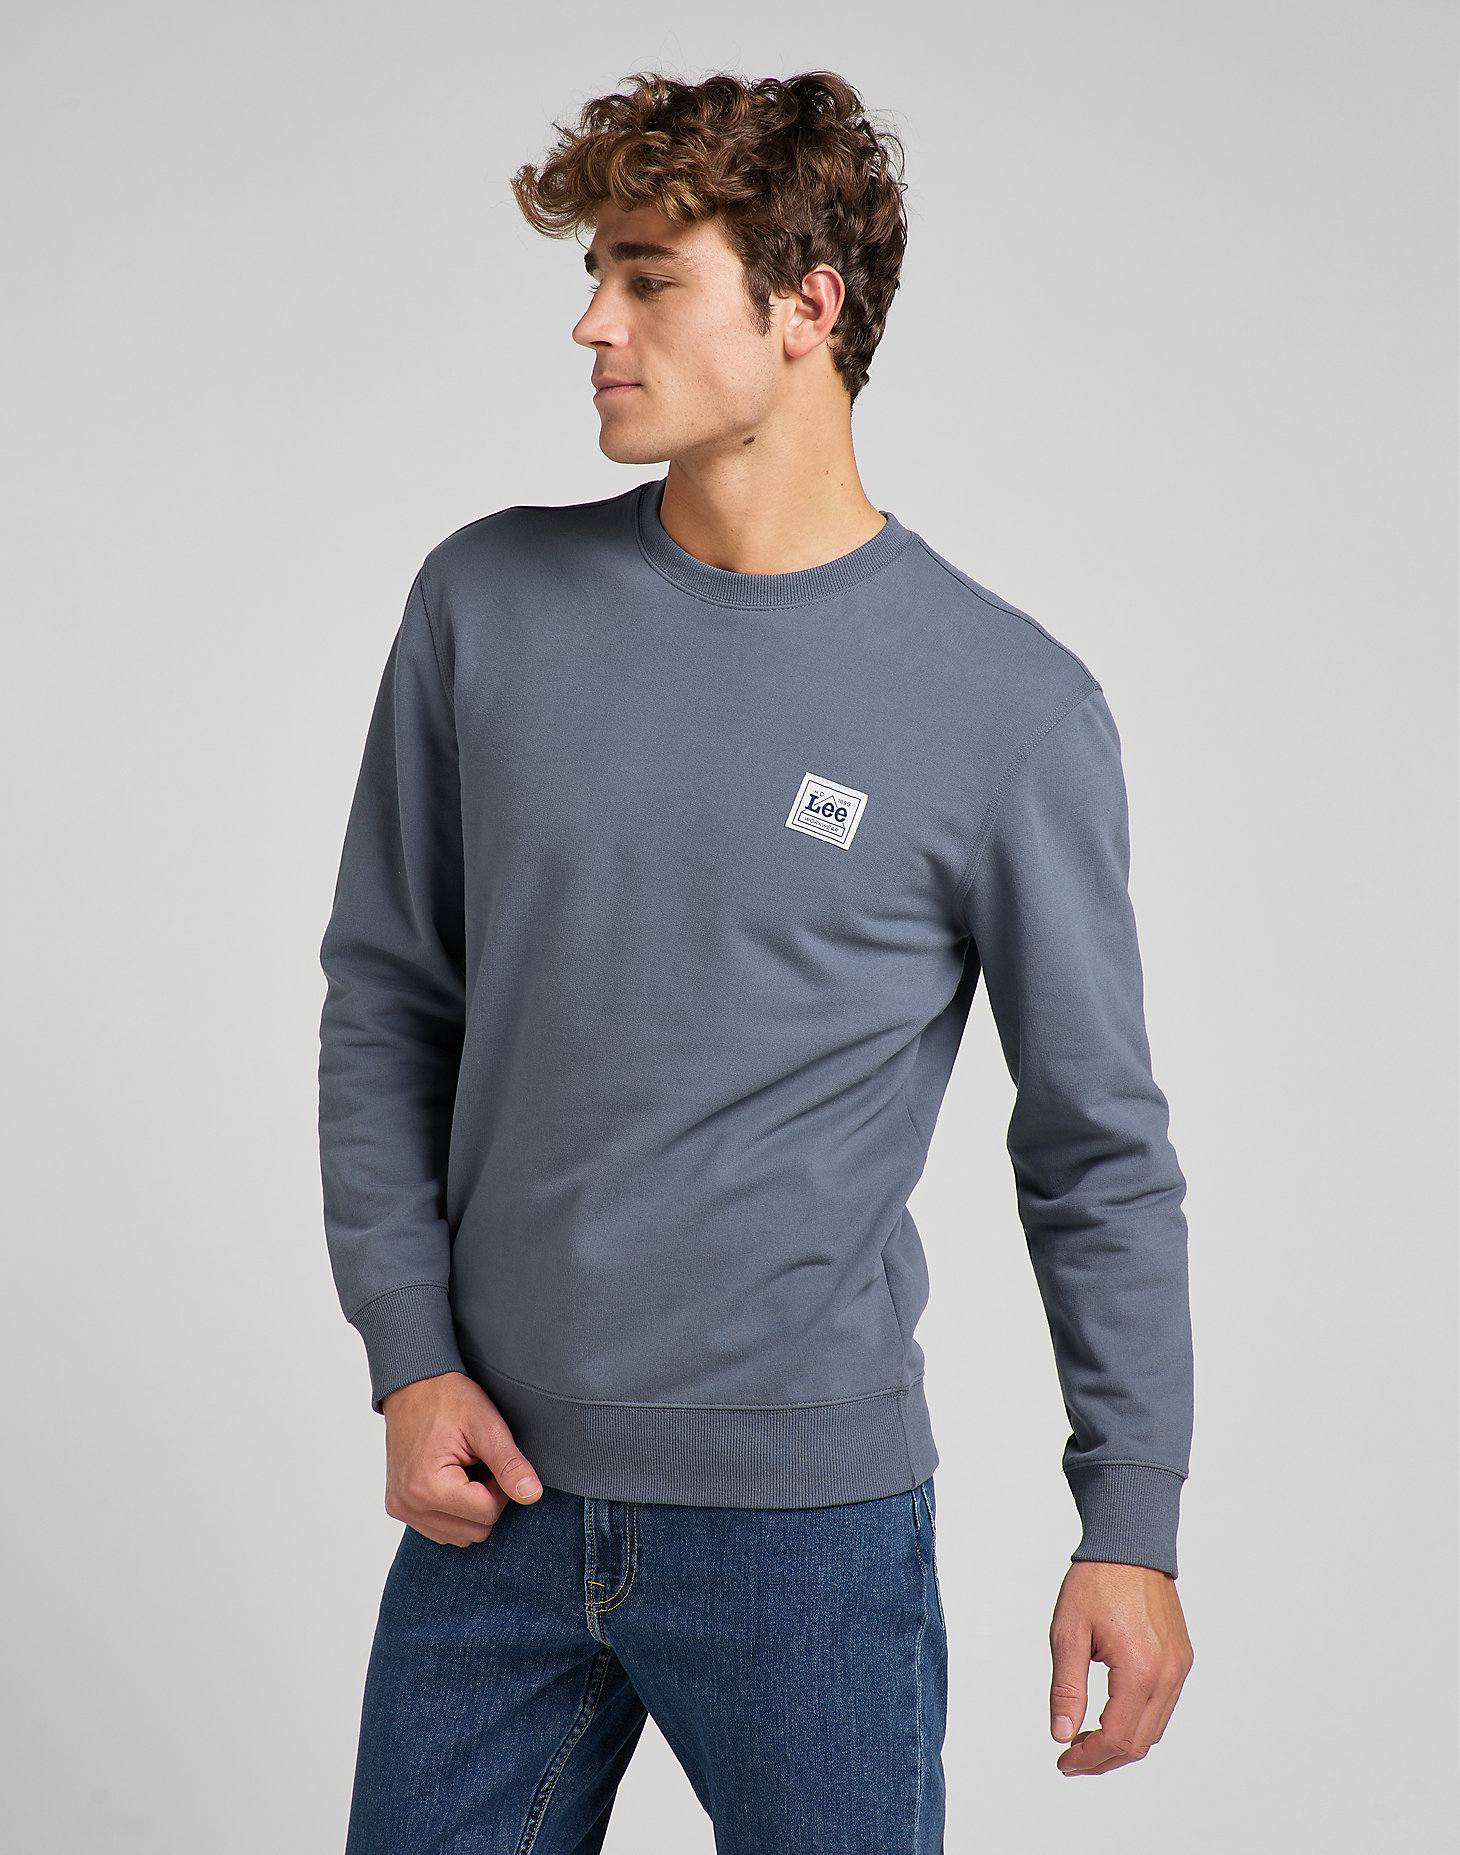 Branded Crew Sws in Washed Grey alternative view 3